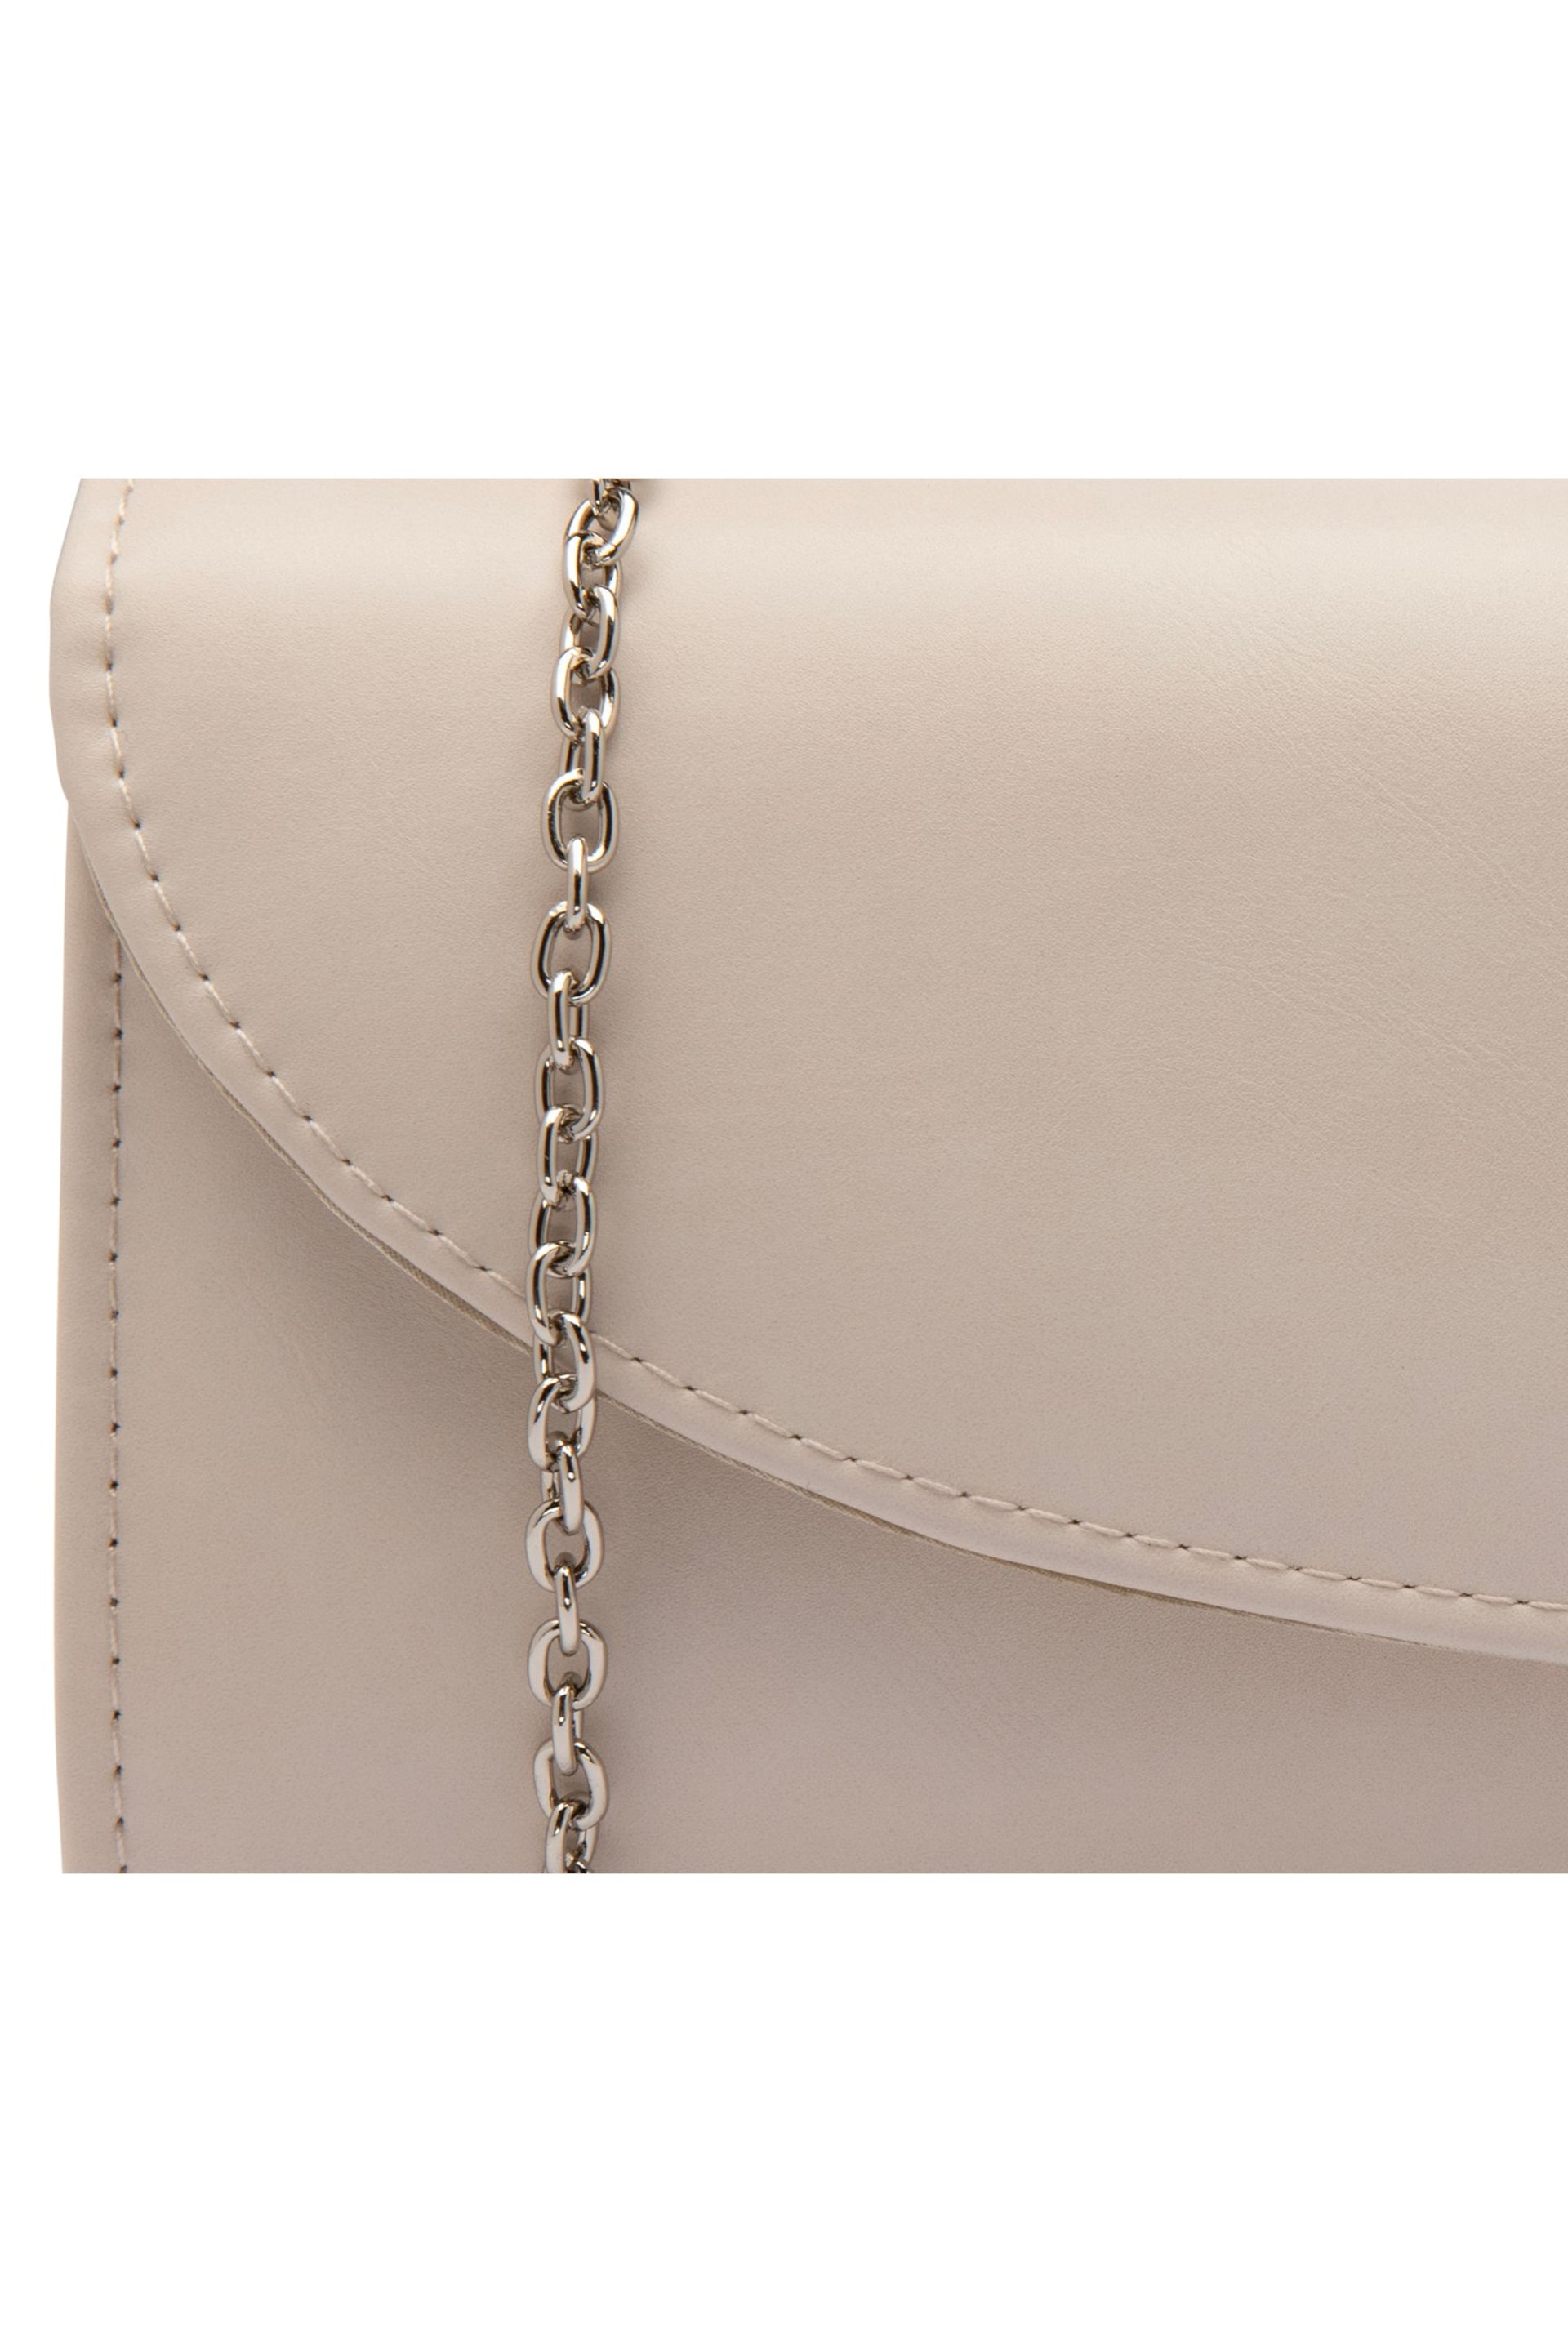 Lotus Nude Clutch Bag with Chain - Image 3 of 4